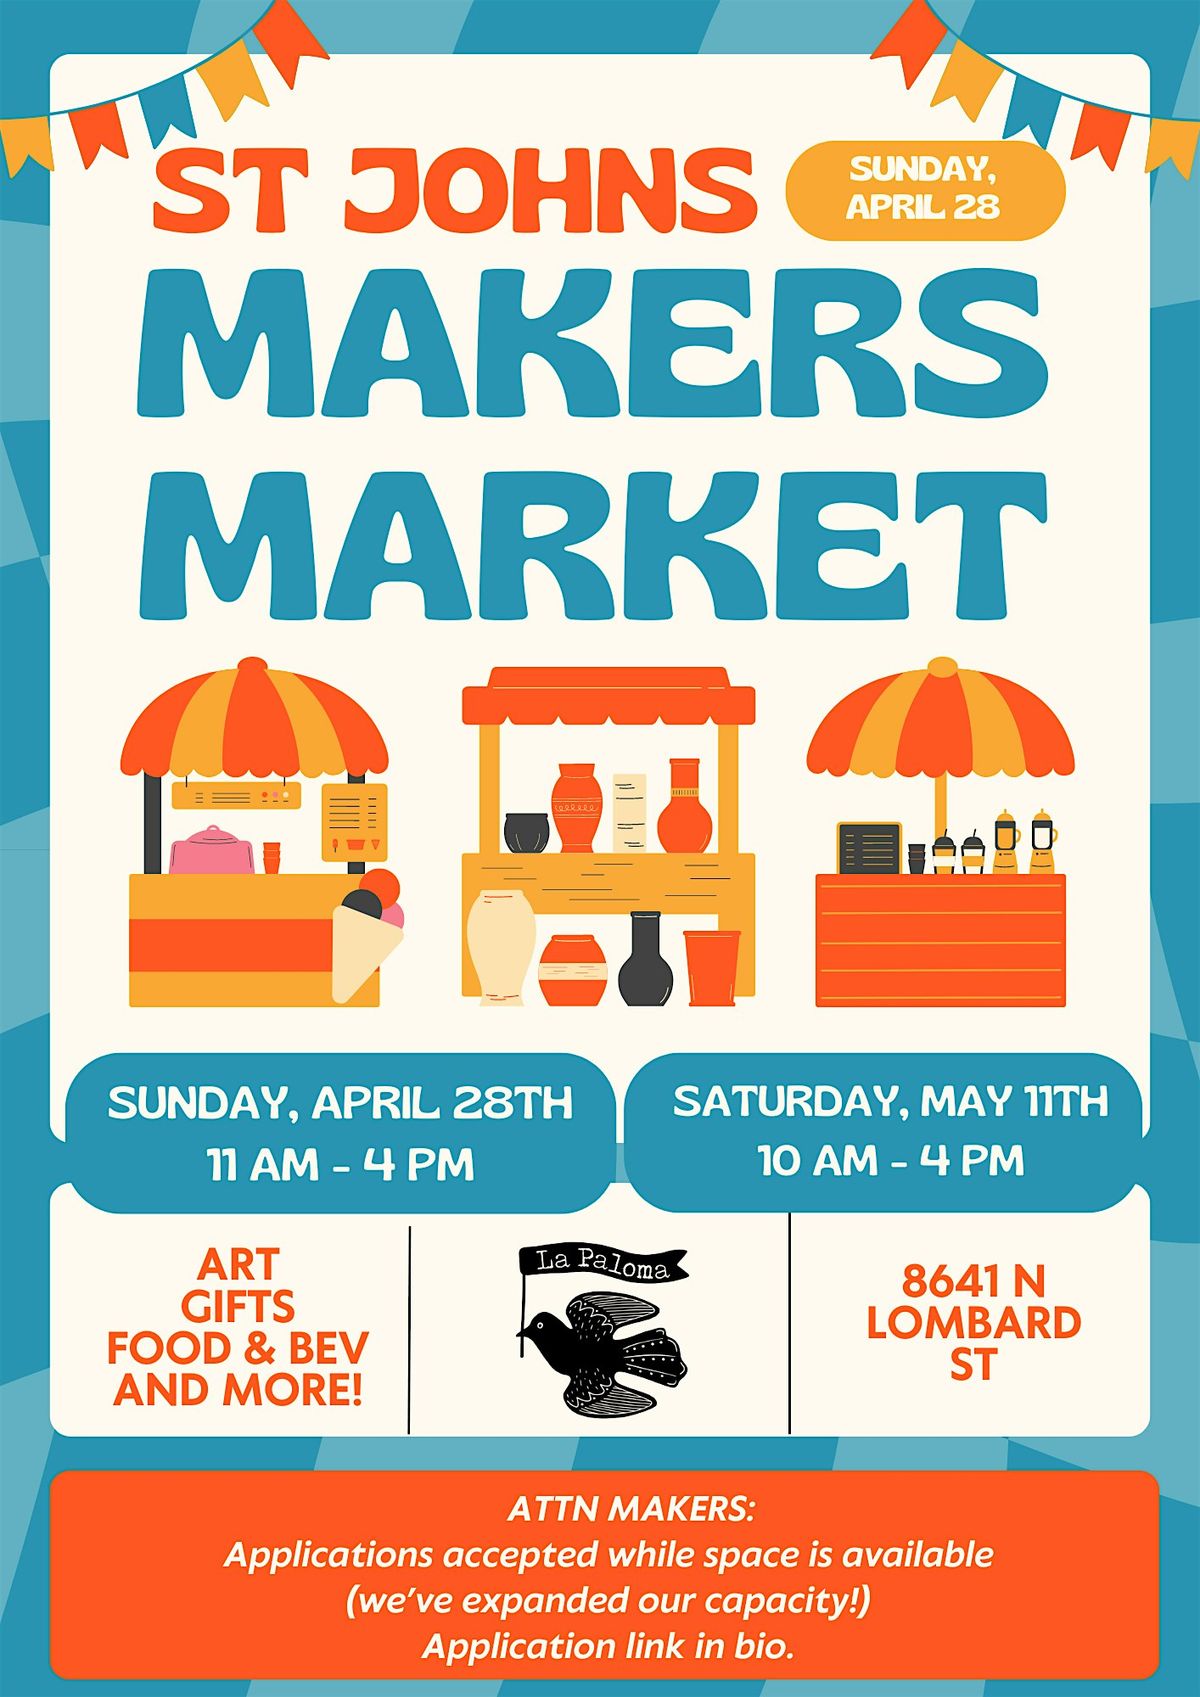 St Johns Makers Market this Sunday!